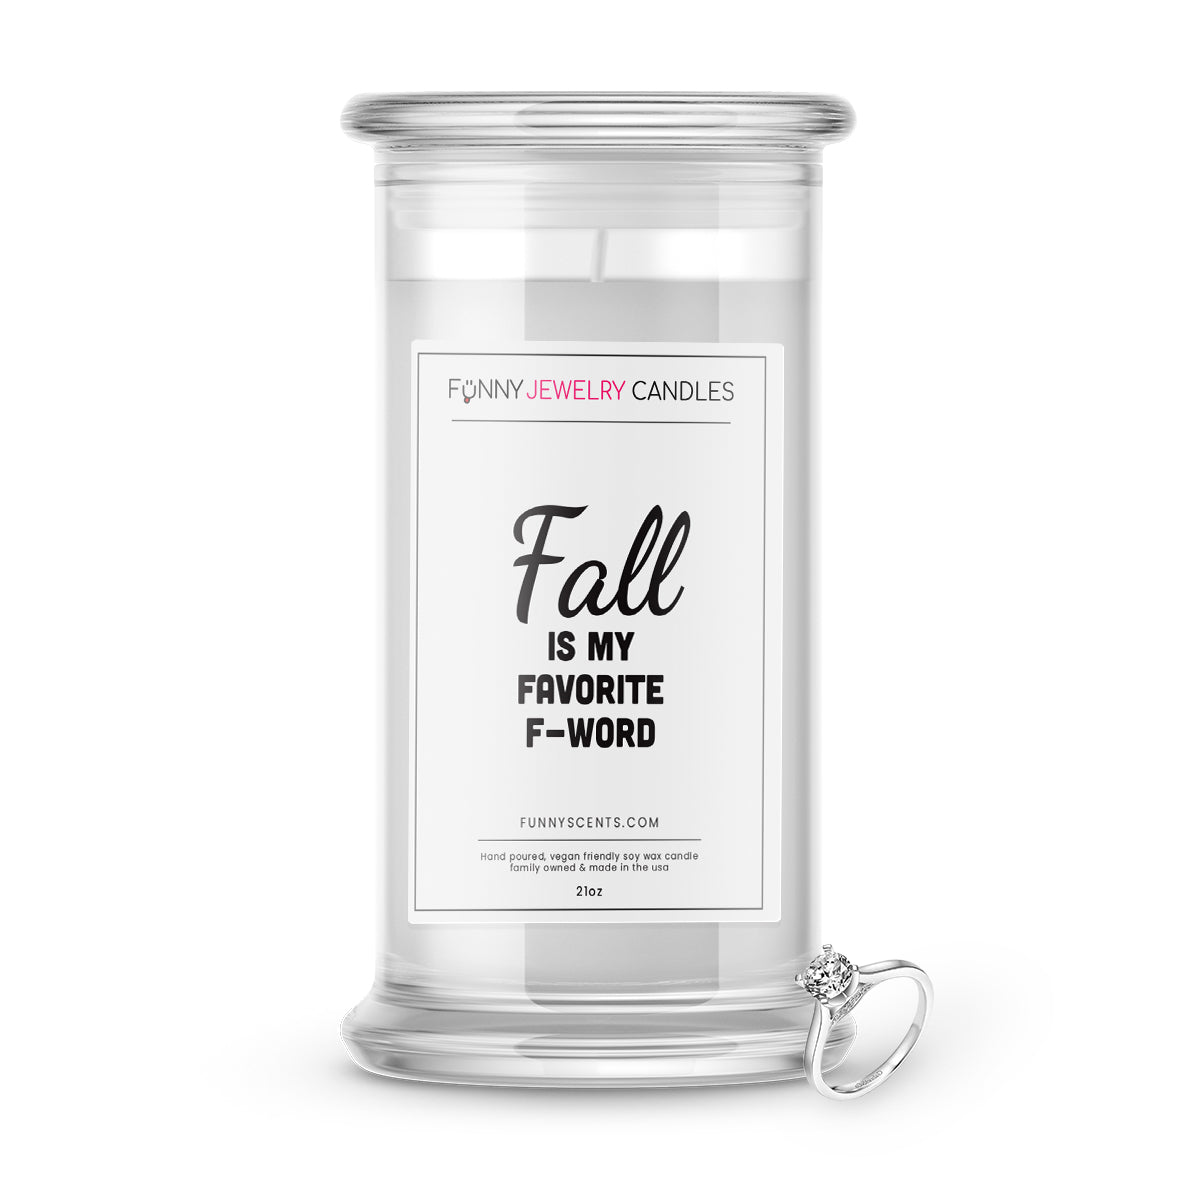 Fall Is My Favorite F-word Jewelry Funny Candles